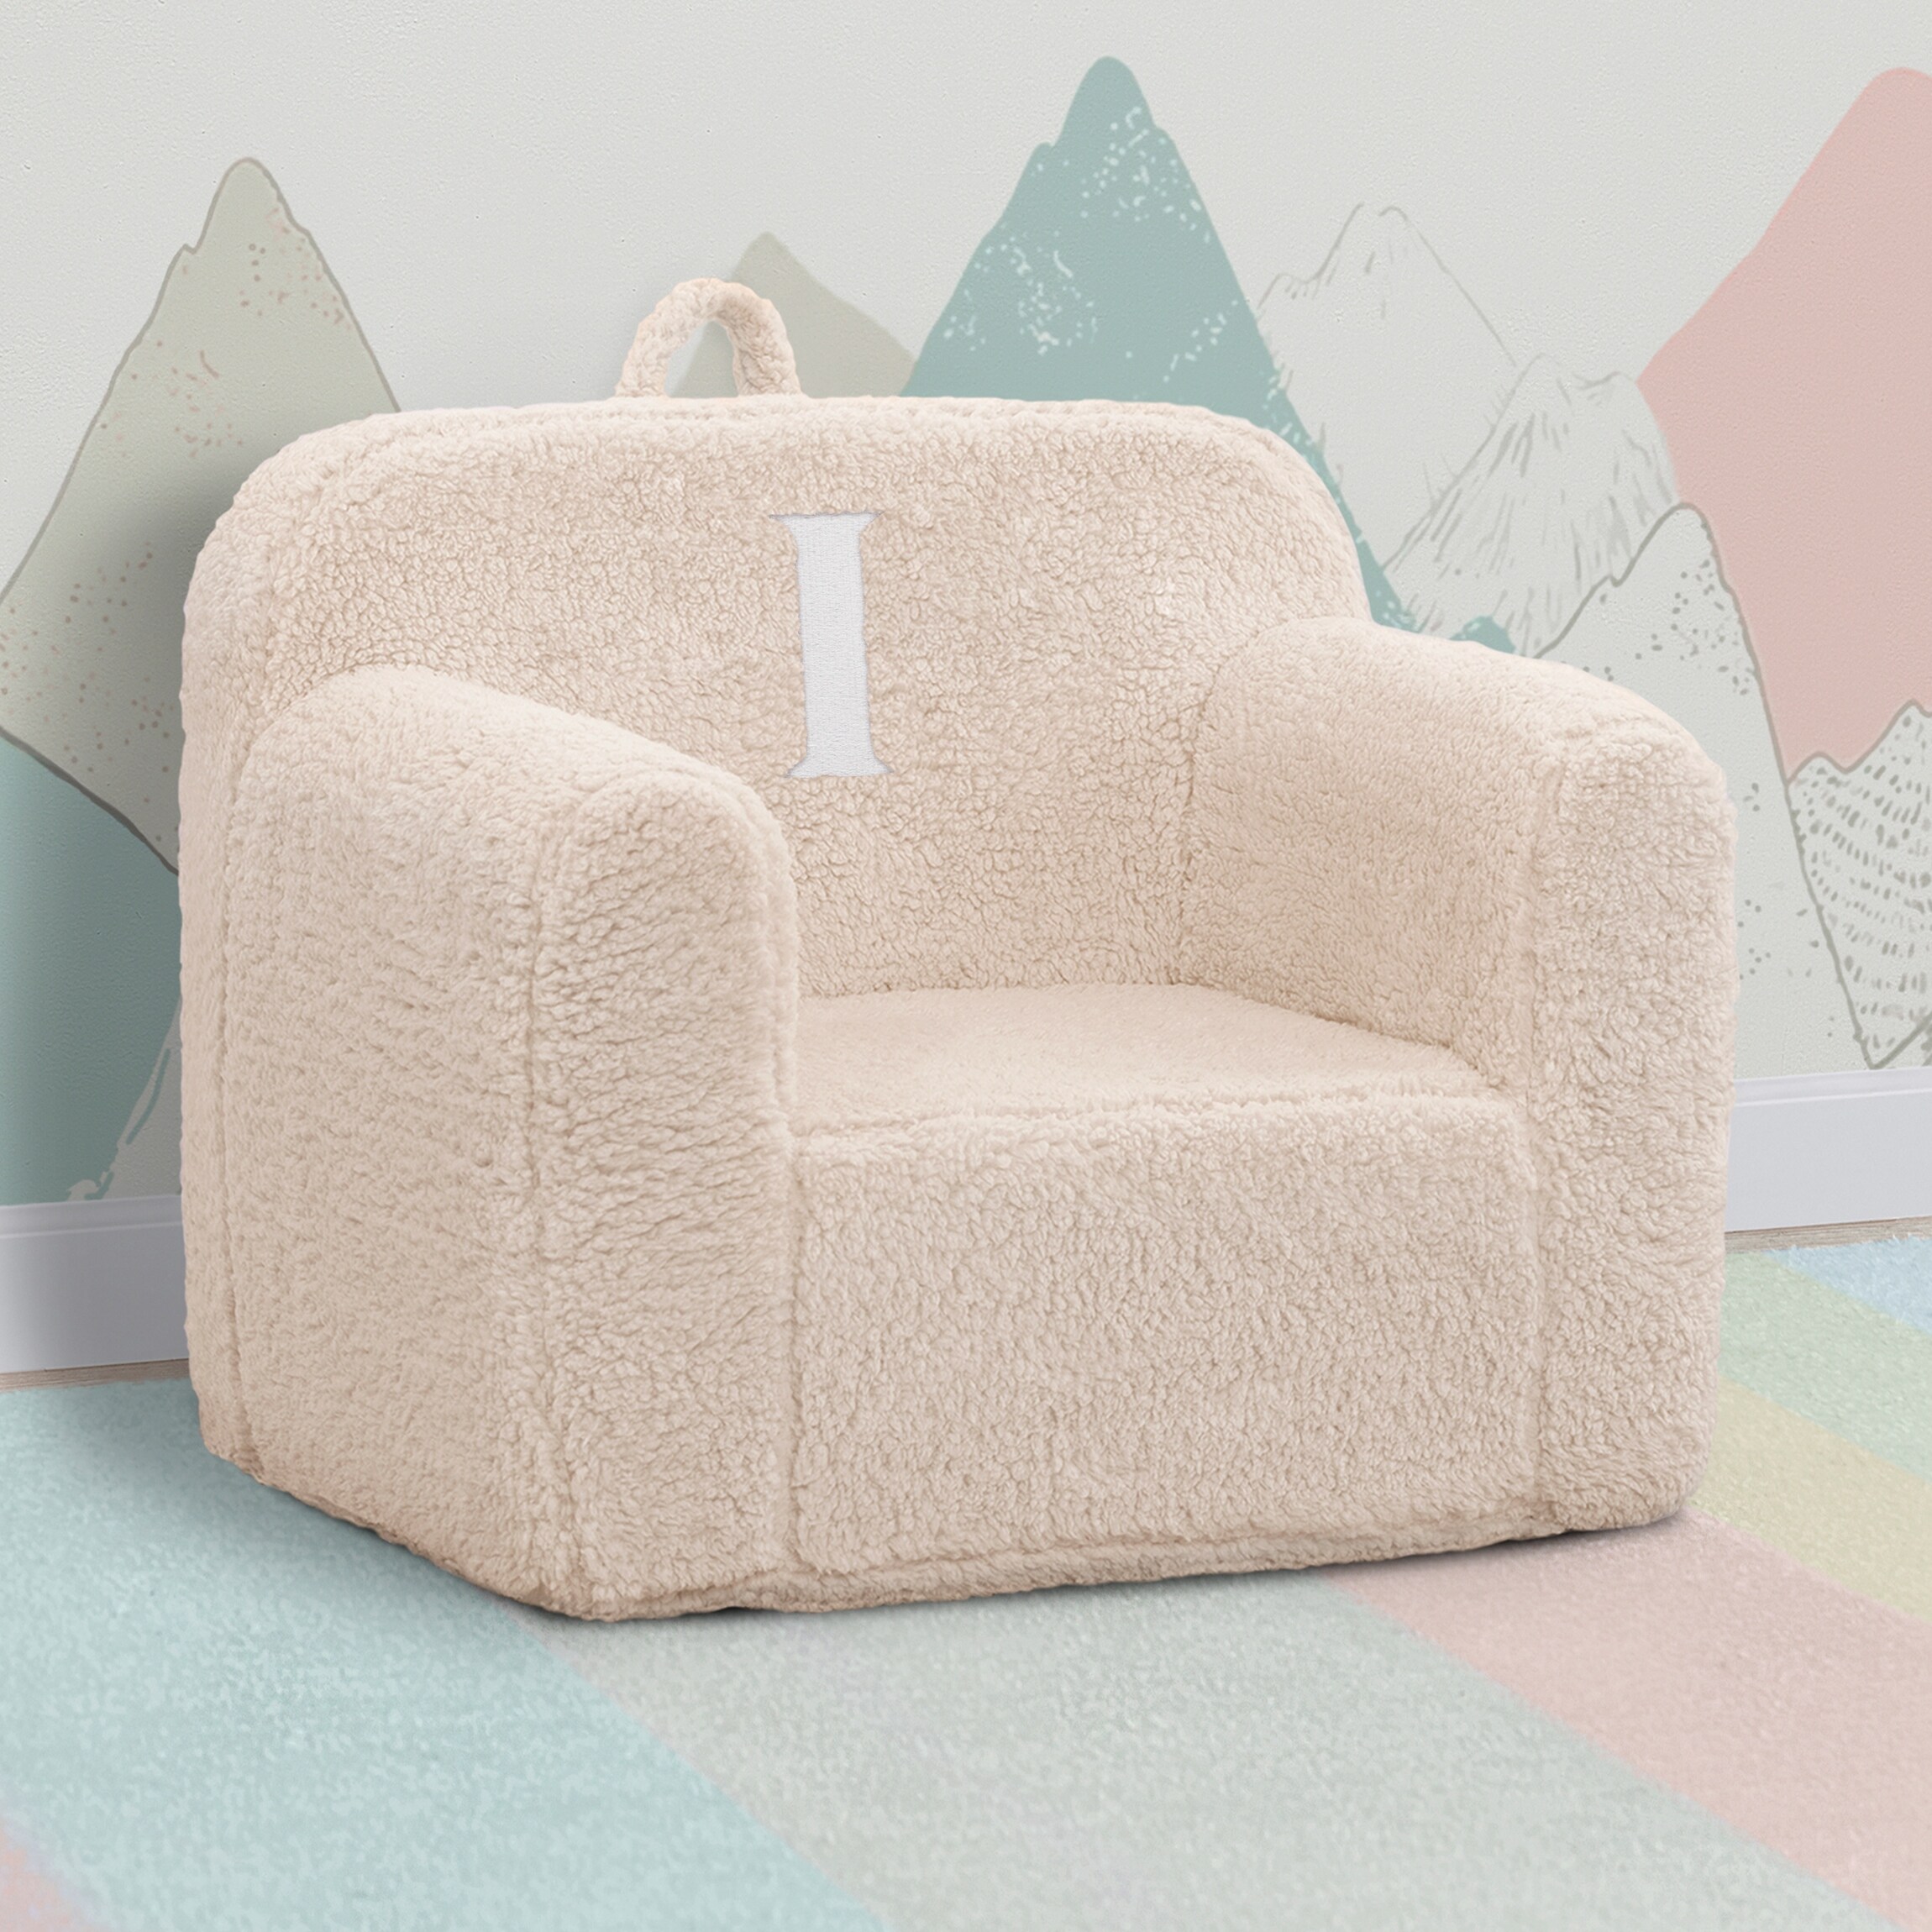 Personalized Monogram Cozee Sherpa Chair - Customize with Letter I - Foam Kids Chair for Ages 18 Months and Up